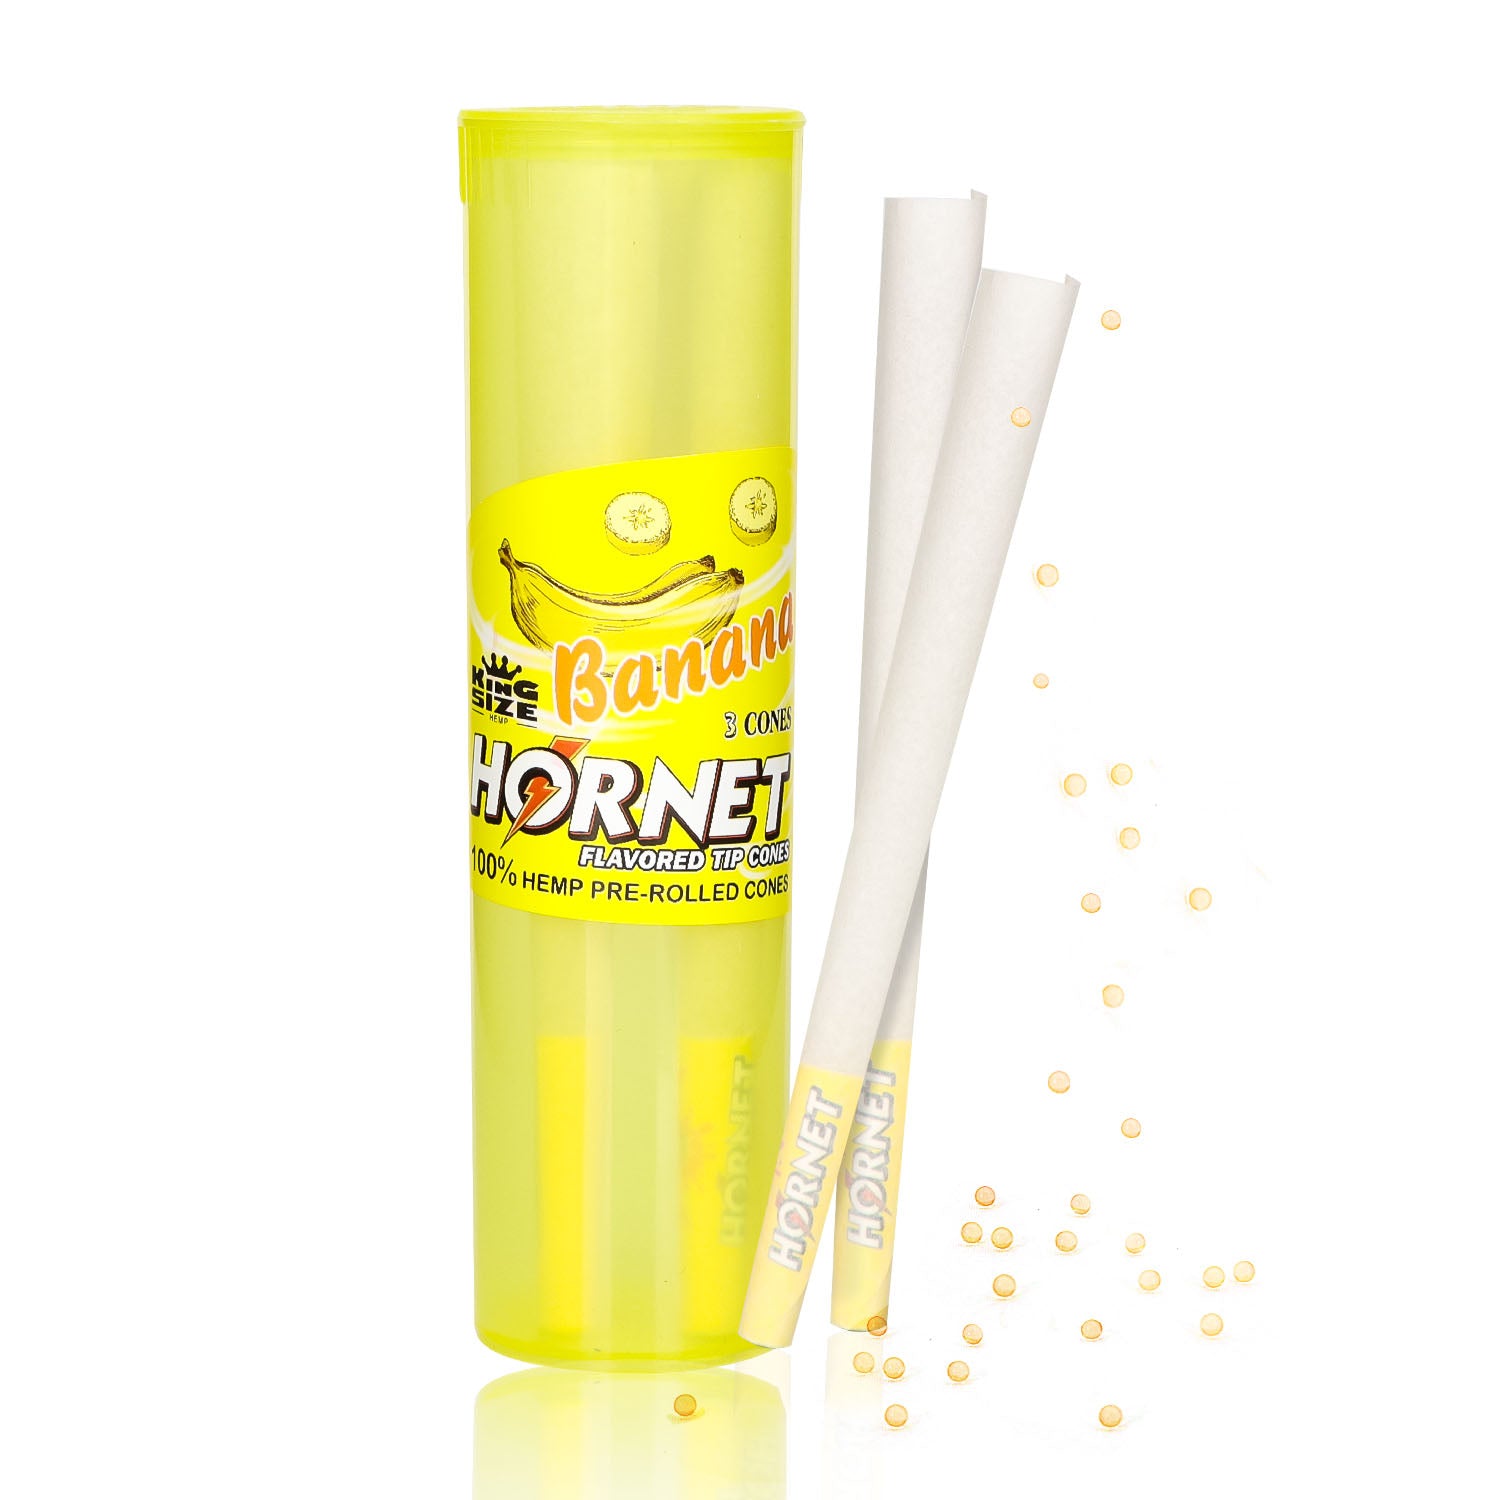 HORNET Banana Flavors Pre Rolled Cones, King Size Pre Rolled Rolling Paper With Tips, Slow Burning Rolling Cones & Flavored Pop, 3 PCS / Tube, 12 Tubes / Box